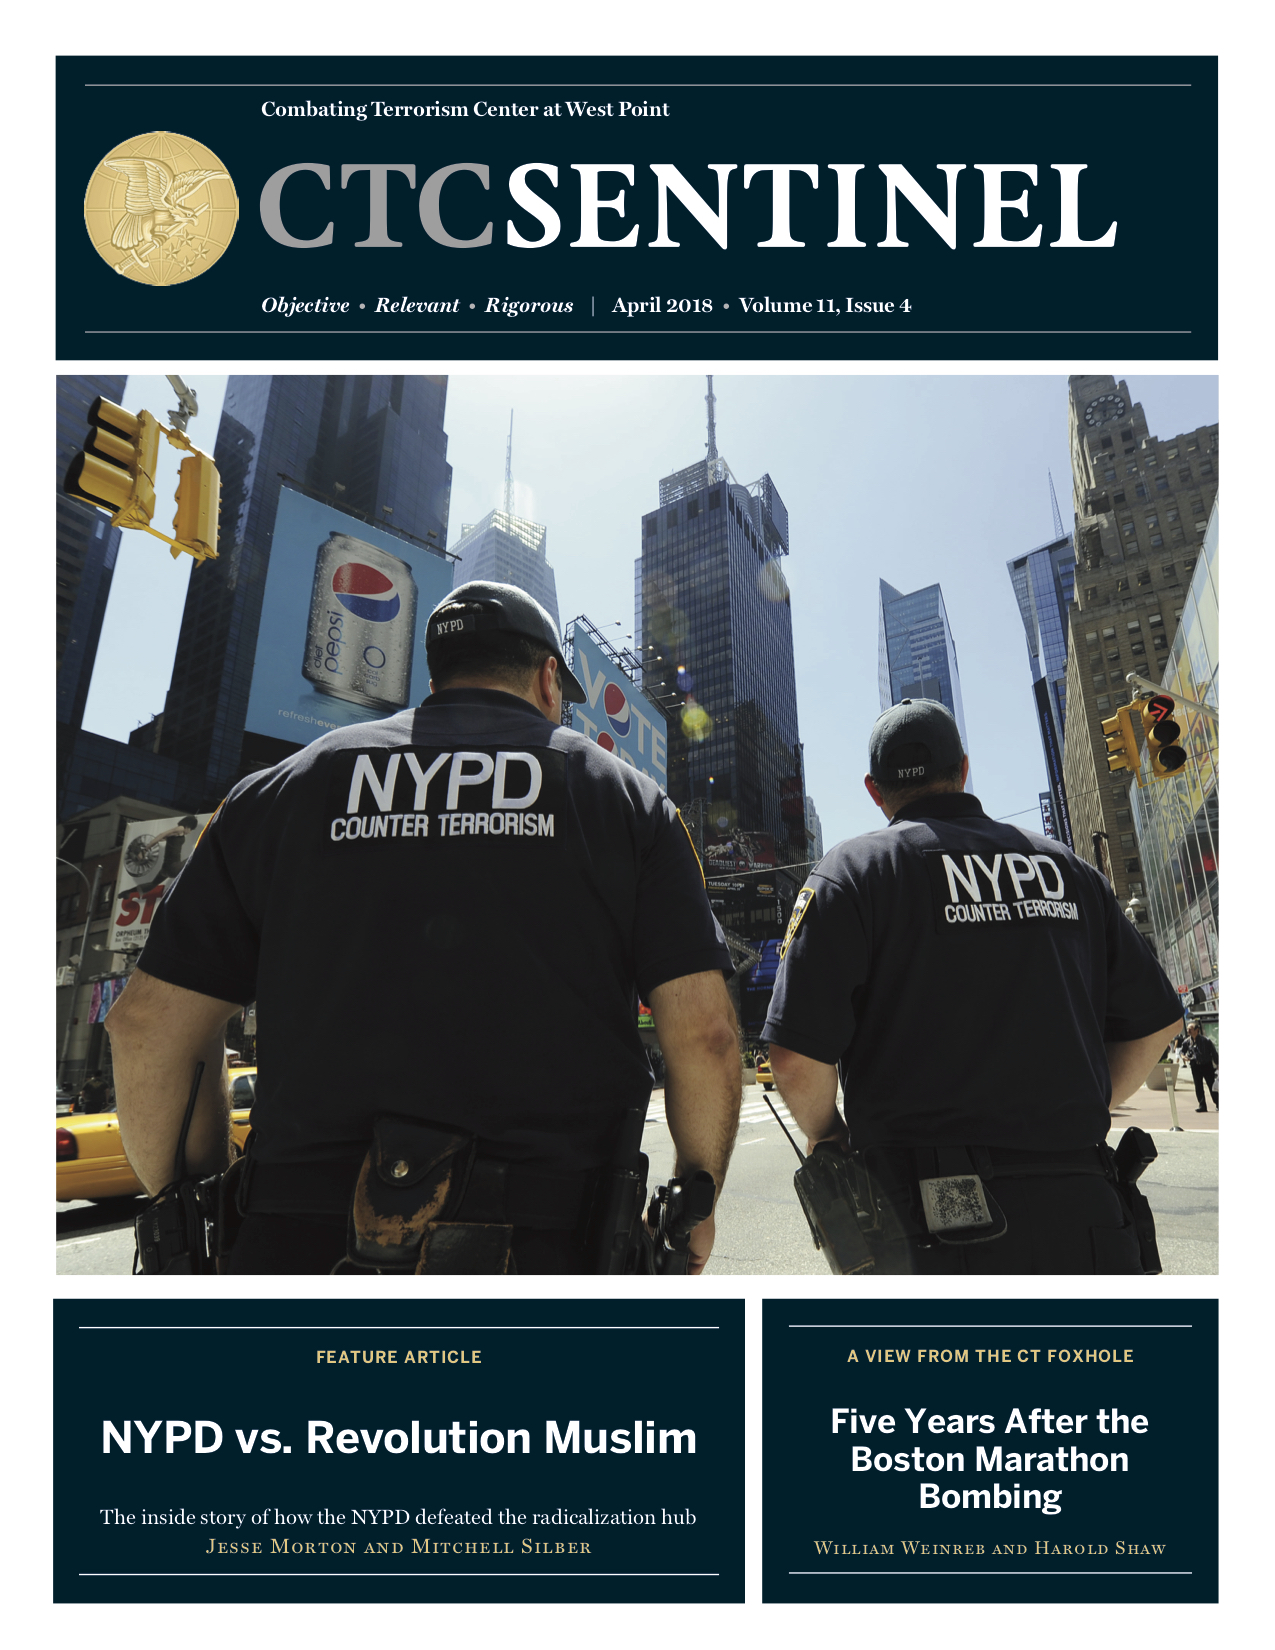 NYPD vs. Revolution Muslim: The Inside Story of the Defeat of a